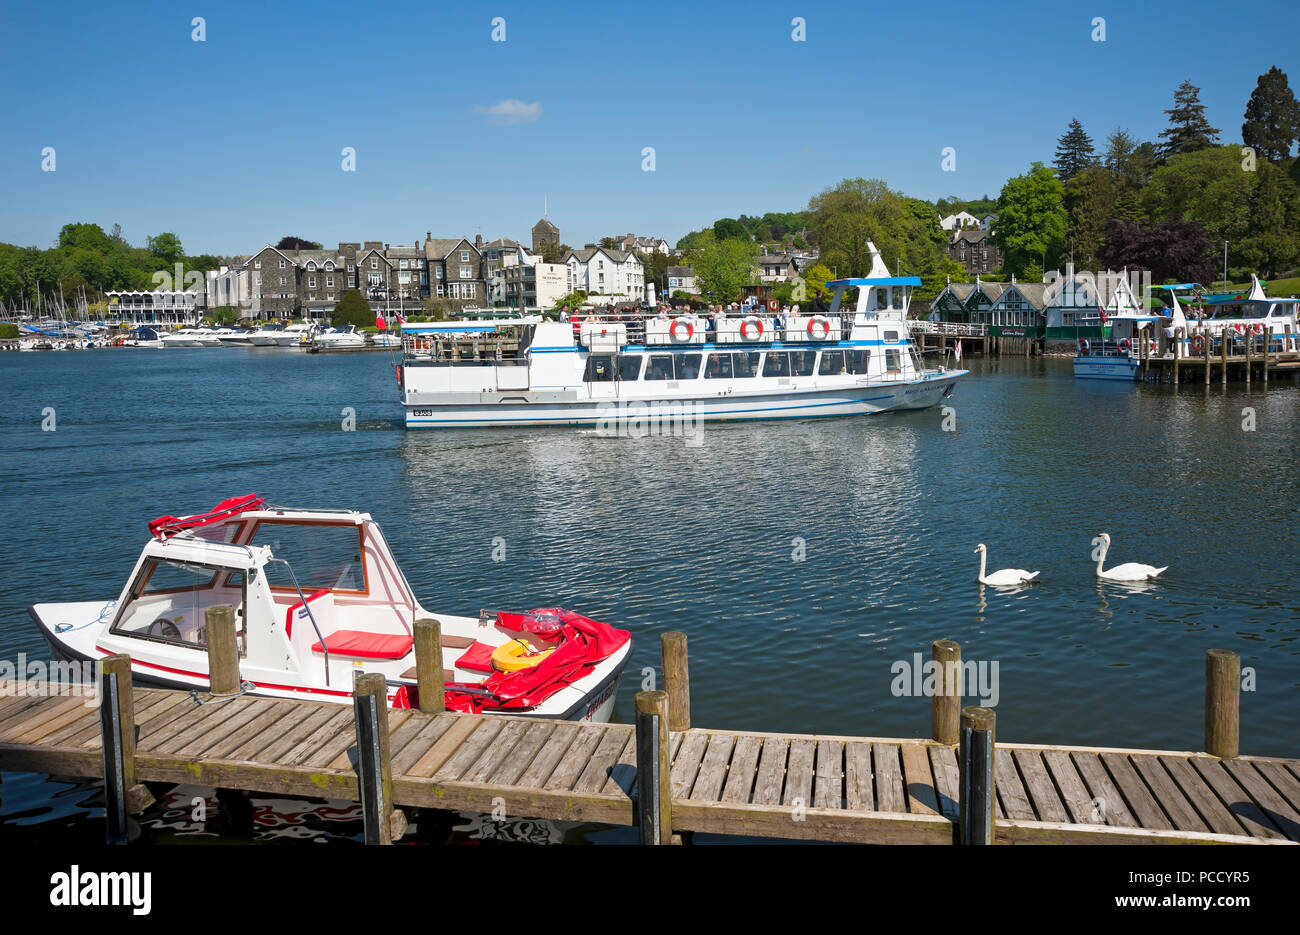 Pleasure boats boat trips on the lake in summer Bowness on Windermere Lake District National Park Cumbria England UK United Kingdom GB Great Britain Stock Photo